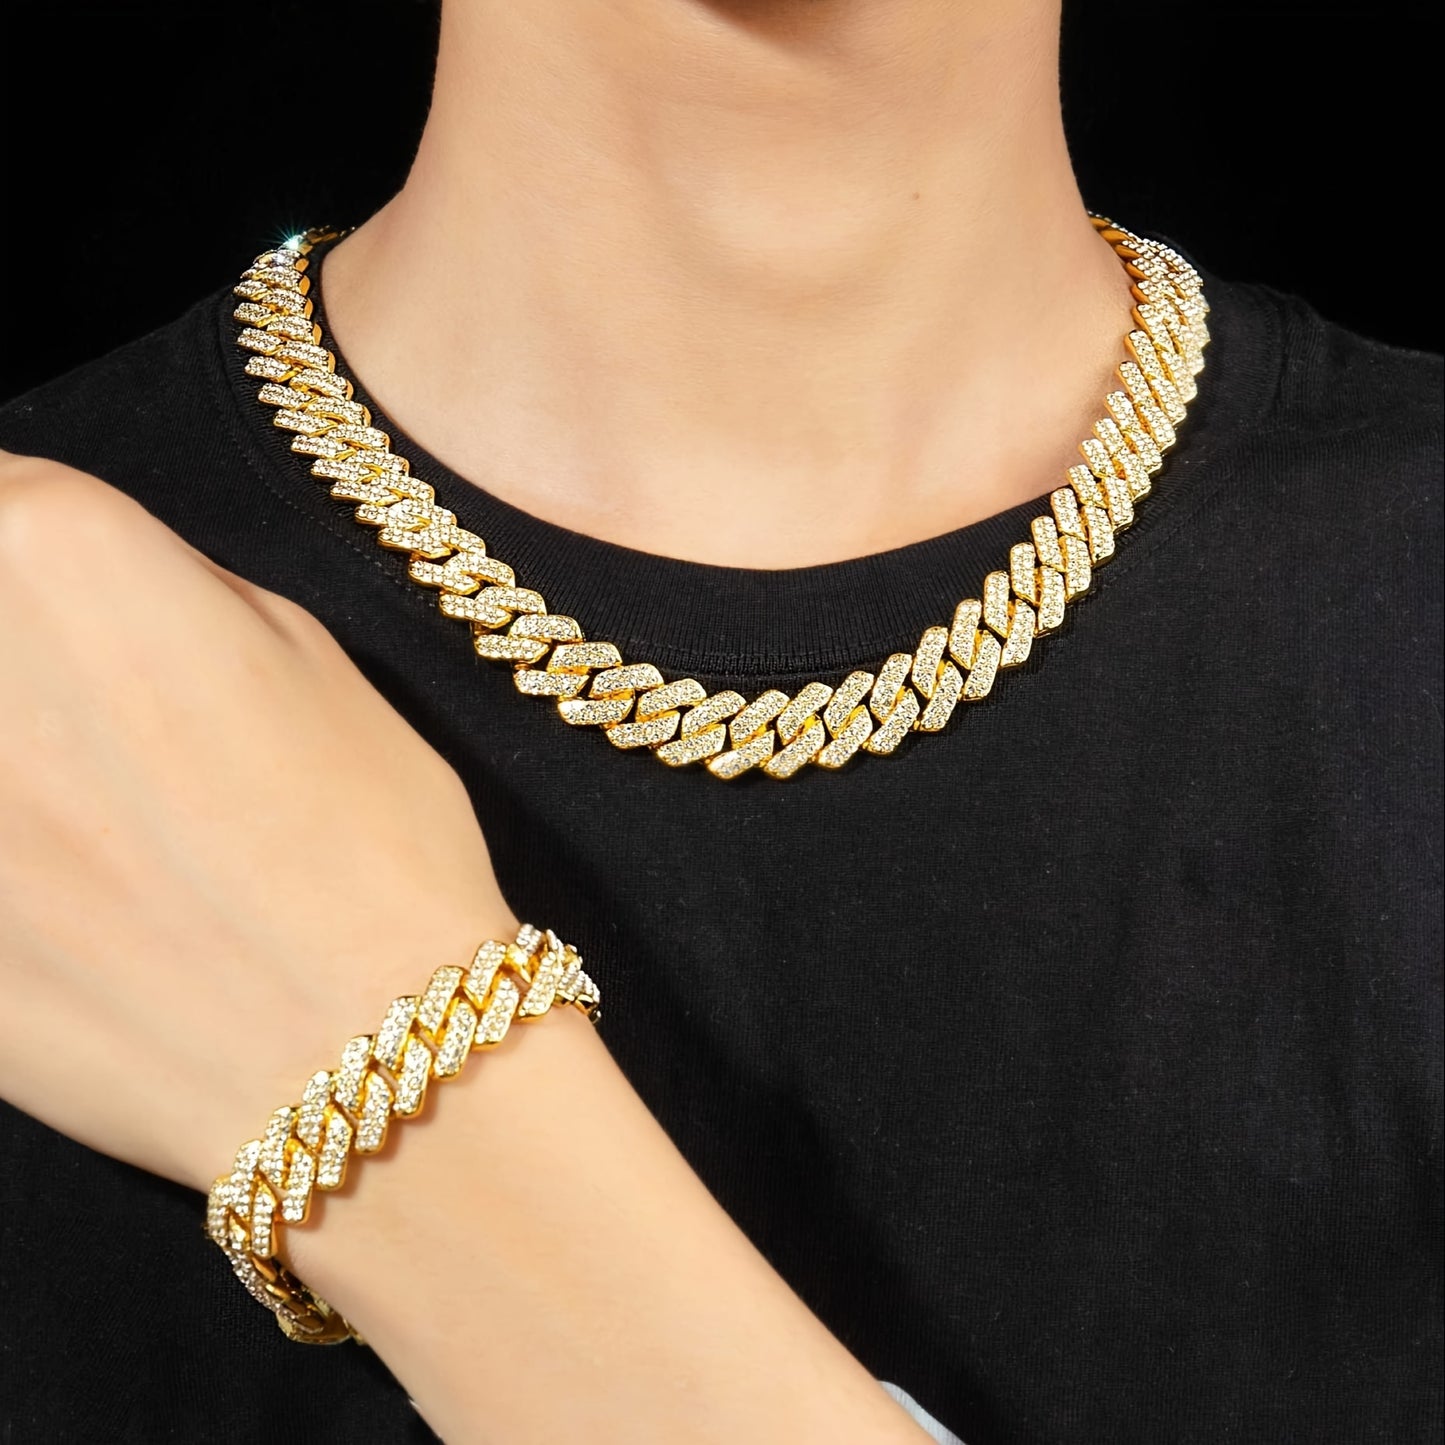 Iced Out Cuban Link Chain for Men - White Zinc Alloy with Rhinestone Detailing